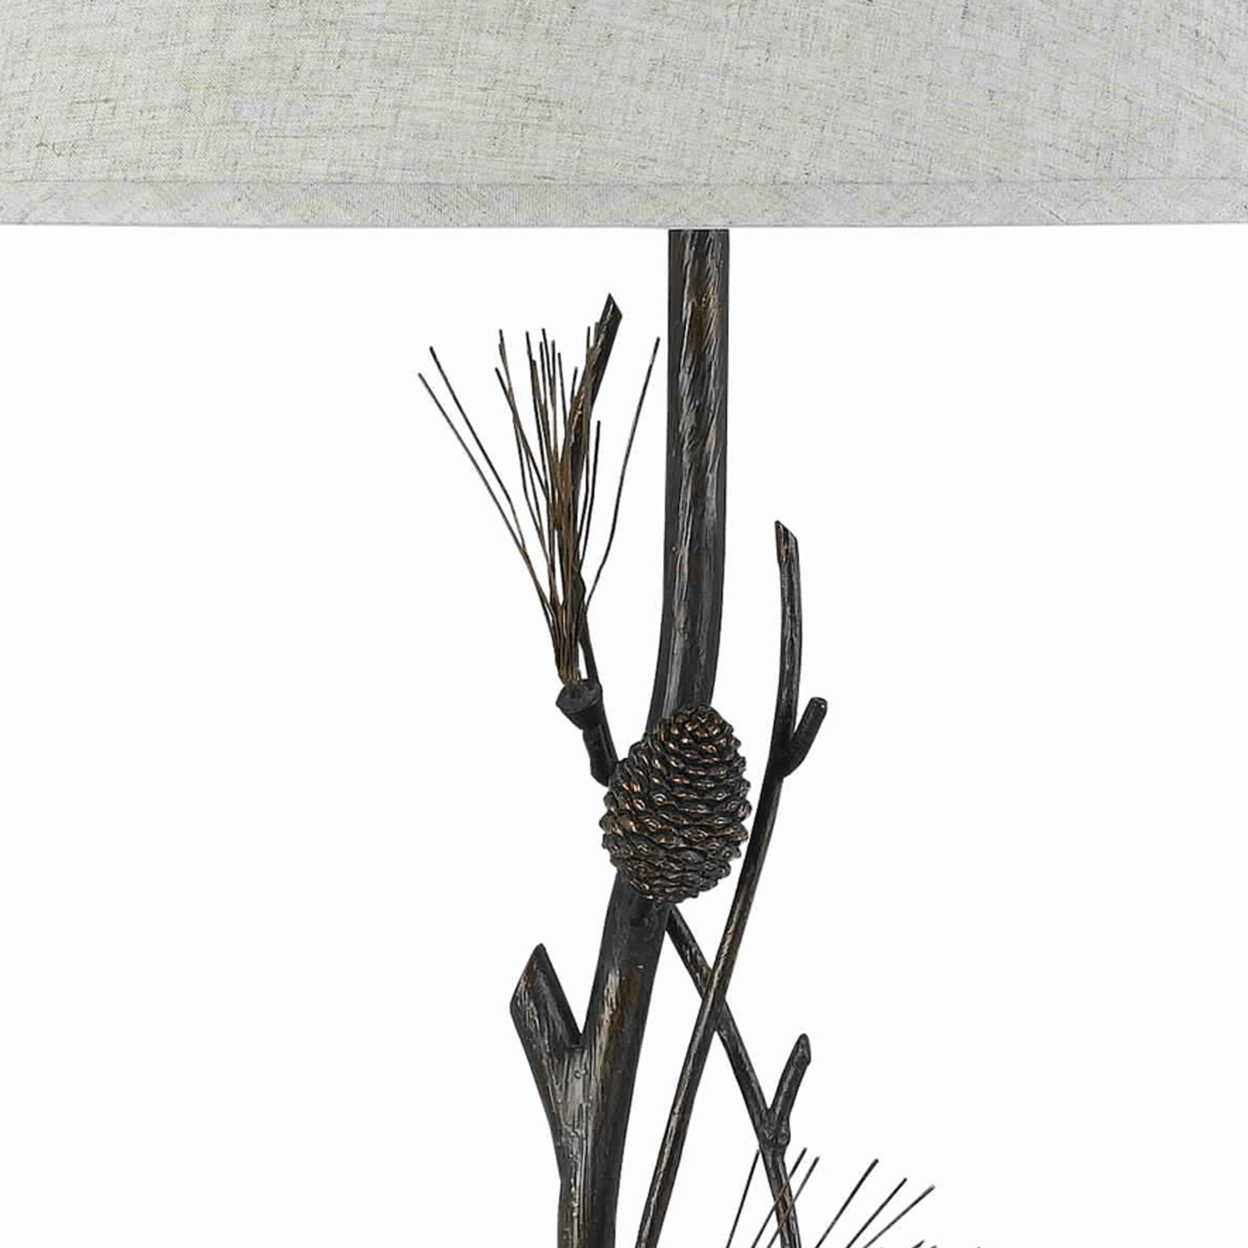 Pine Twig Accent Metal Body Table Lamp With Conical Shade, Bronze And White- Saltoro Sherpi